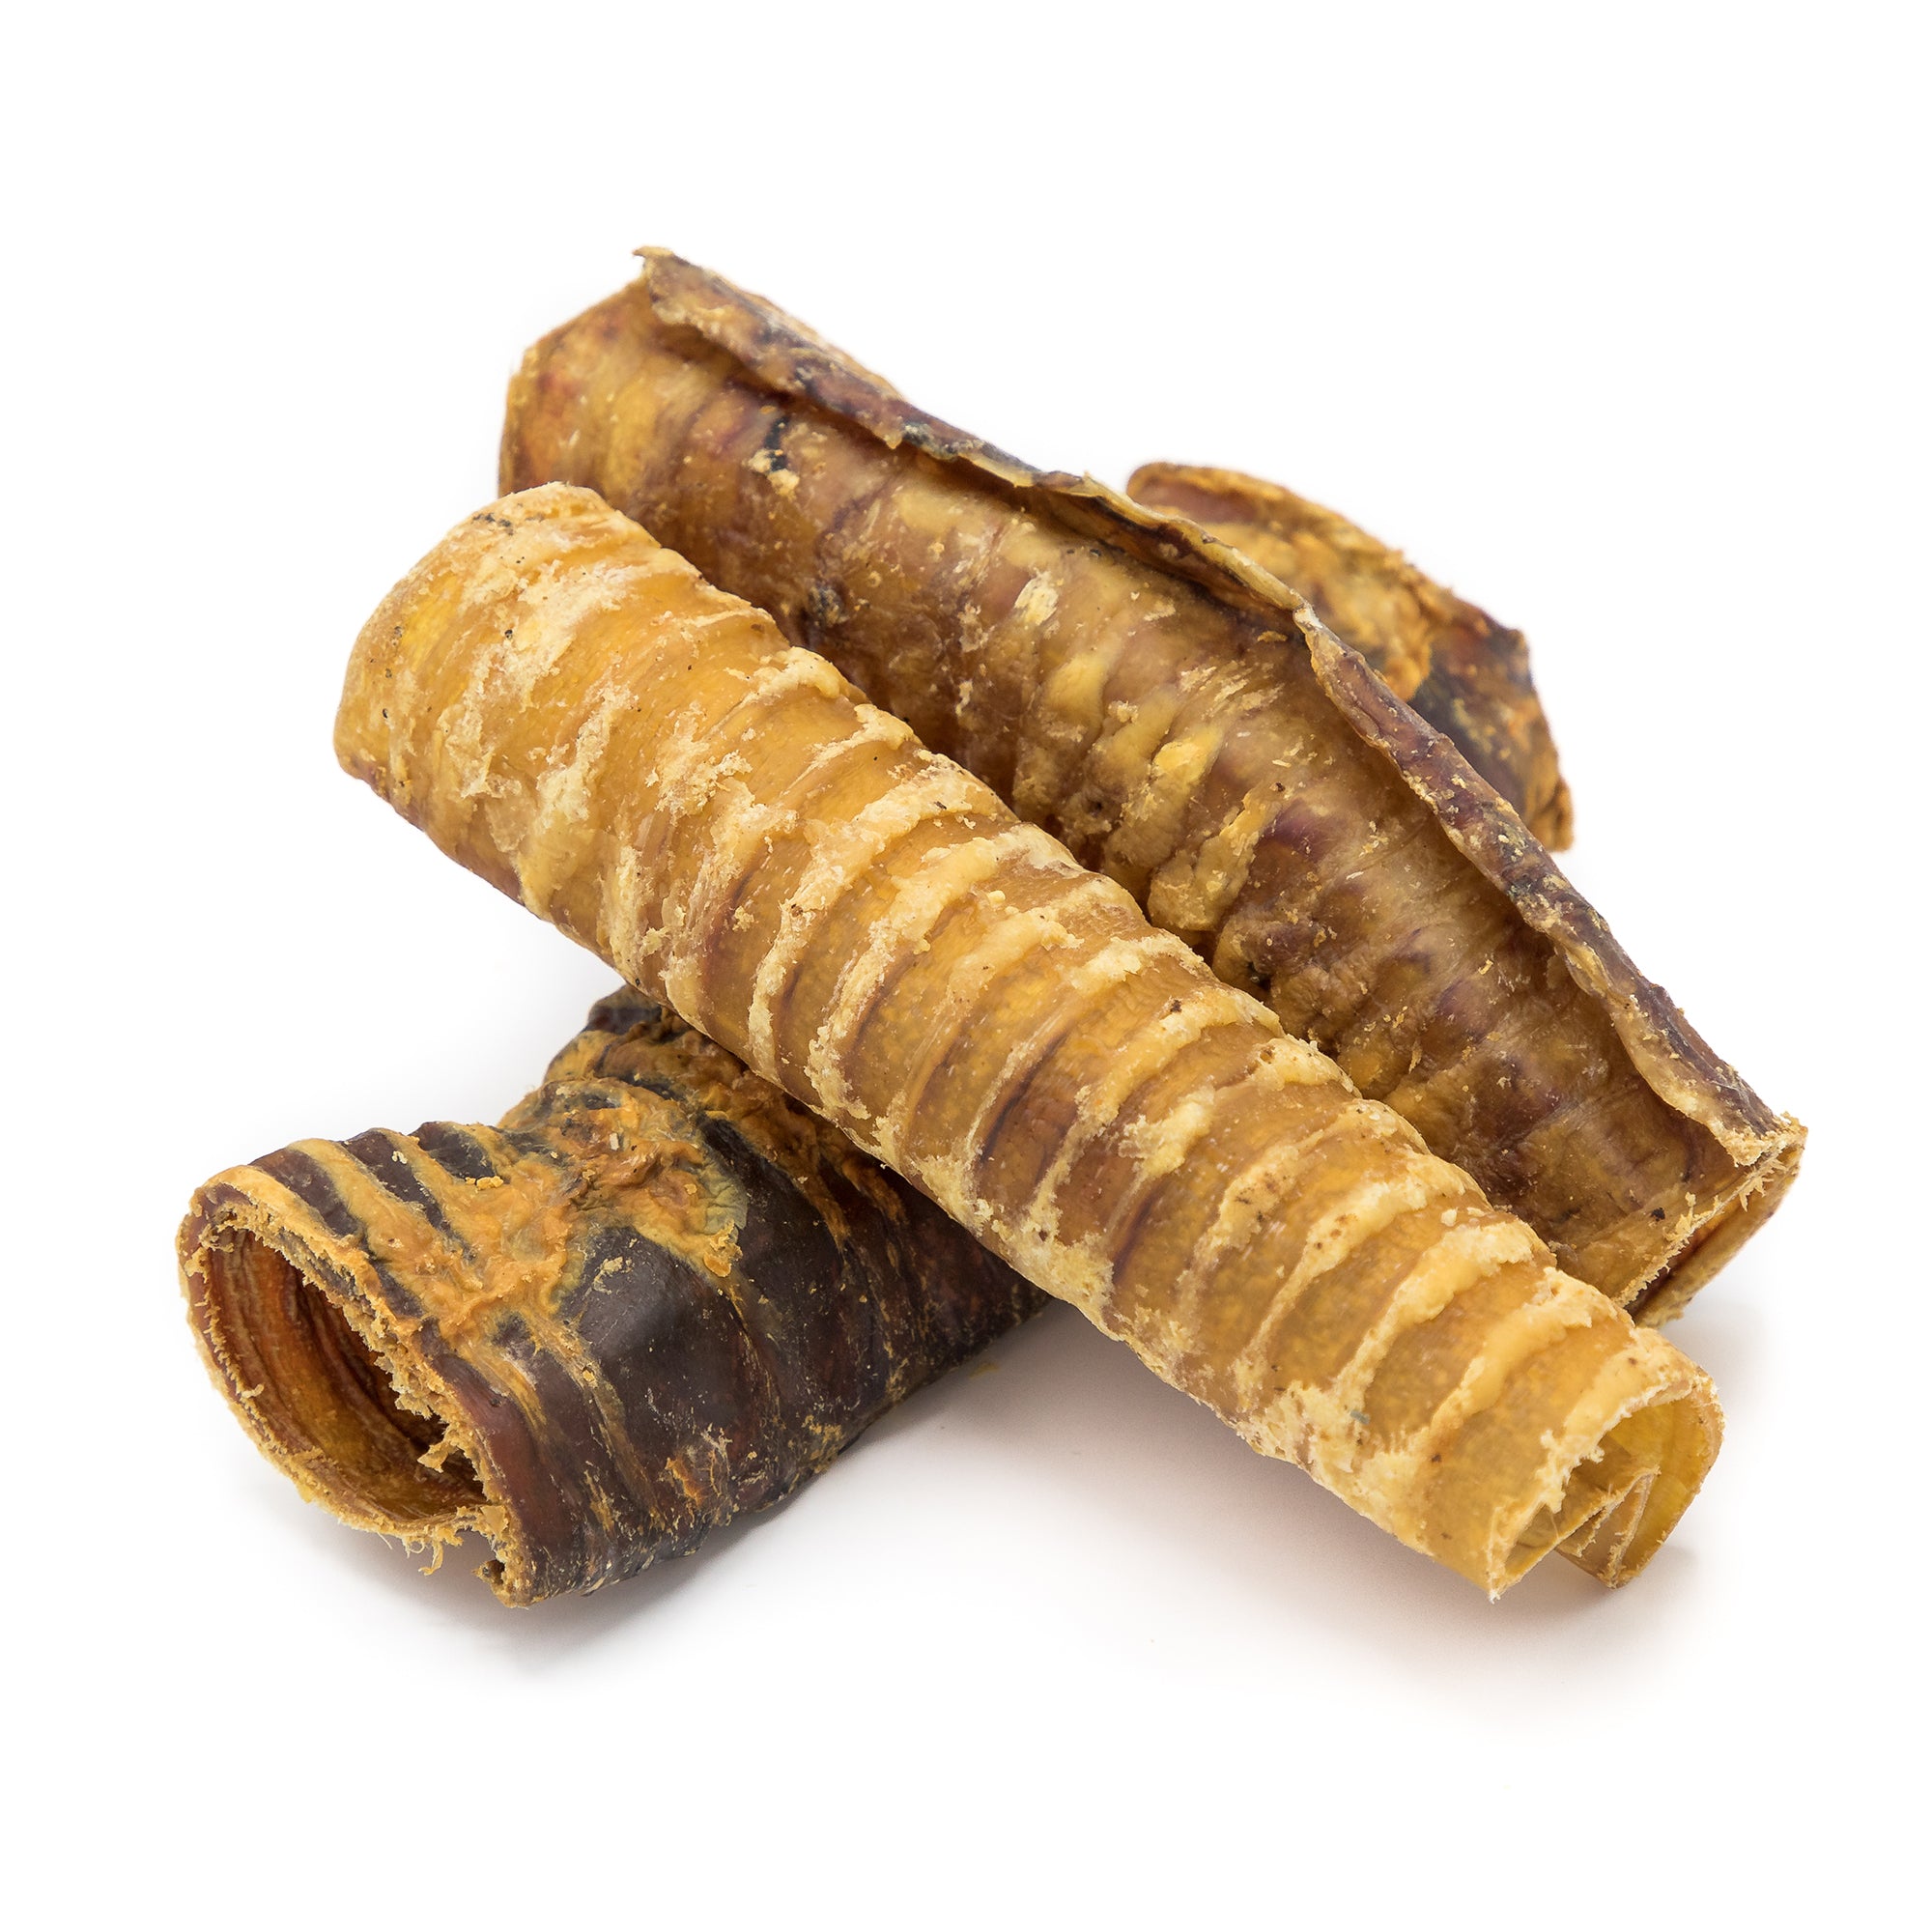 A rolled up Beef Trachea Dog Chew - 5 to 6 Inch from Best Bully Sticks on a white background.